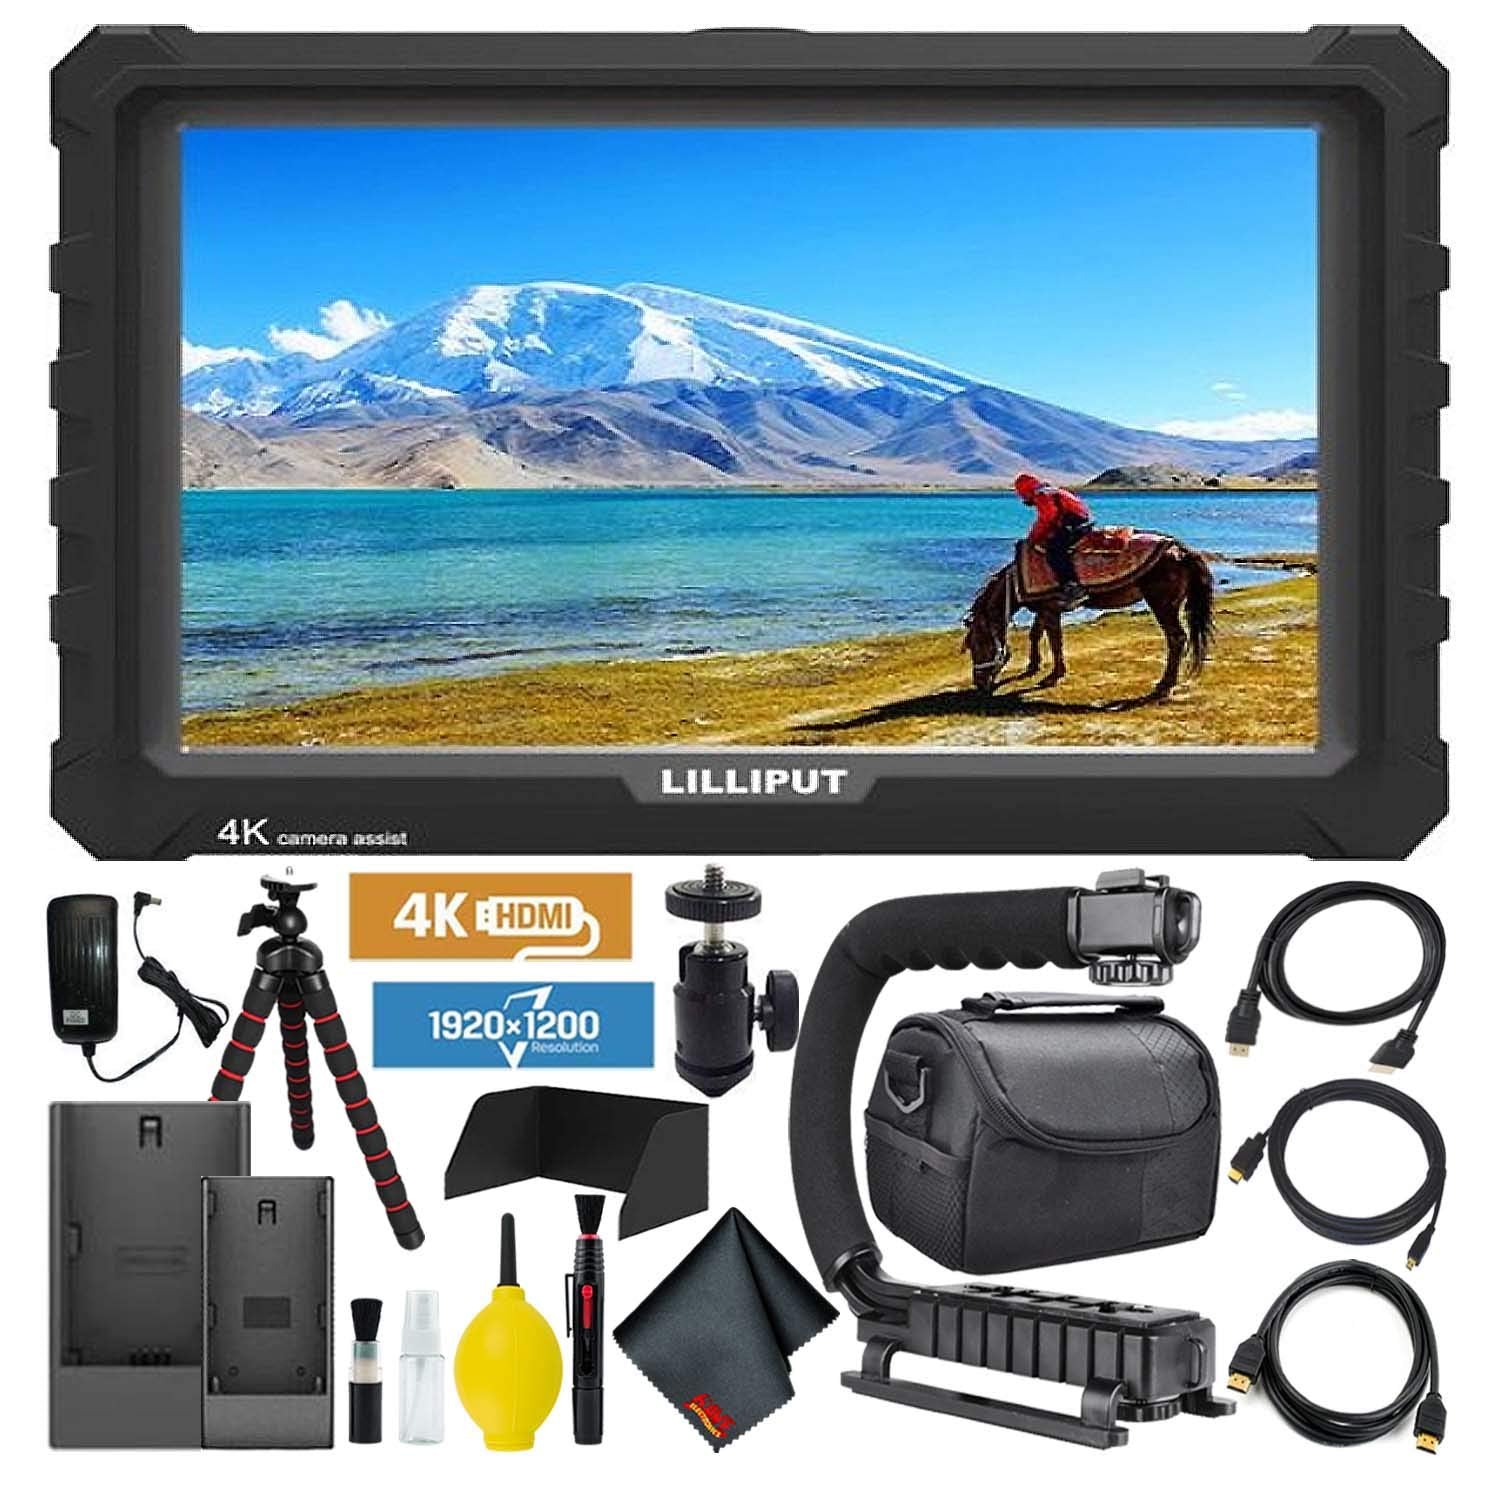 Lilliput A7S Full HD 7 Inch IPS Video Camera Field Monitor with 4K Support (Black Case) HDMI Ports Essentials Bundle with Stabilizing Handle, Tripod,